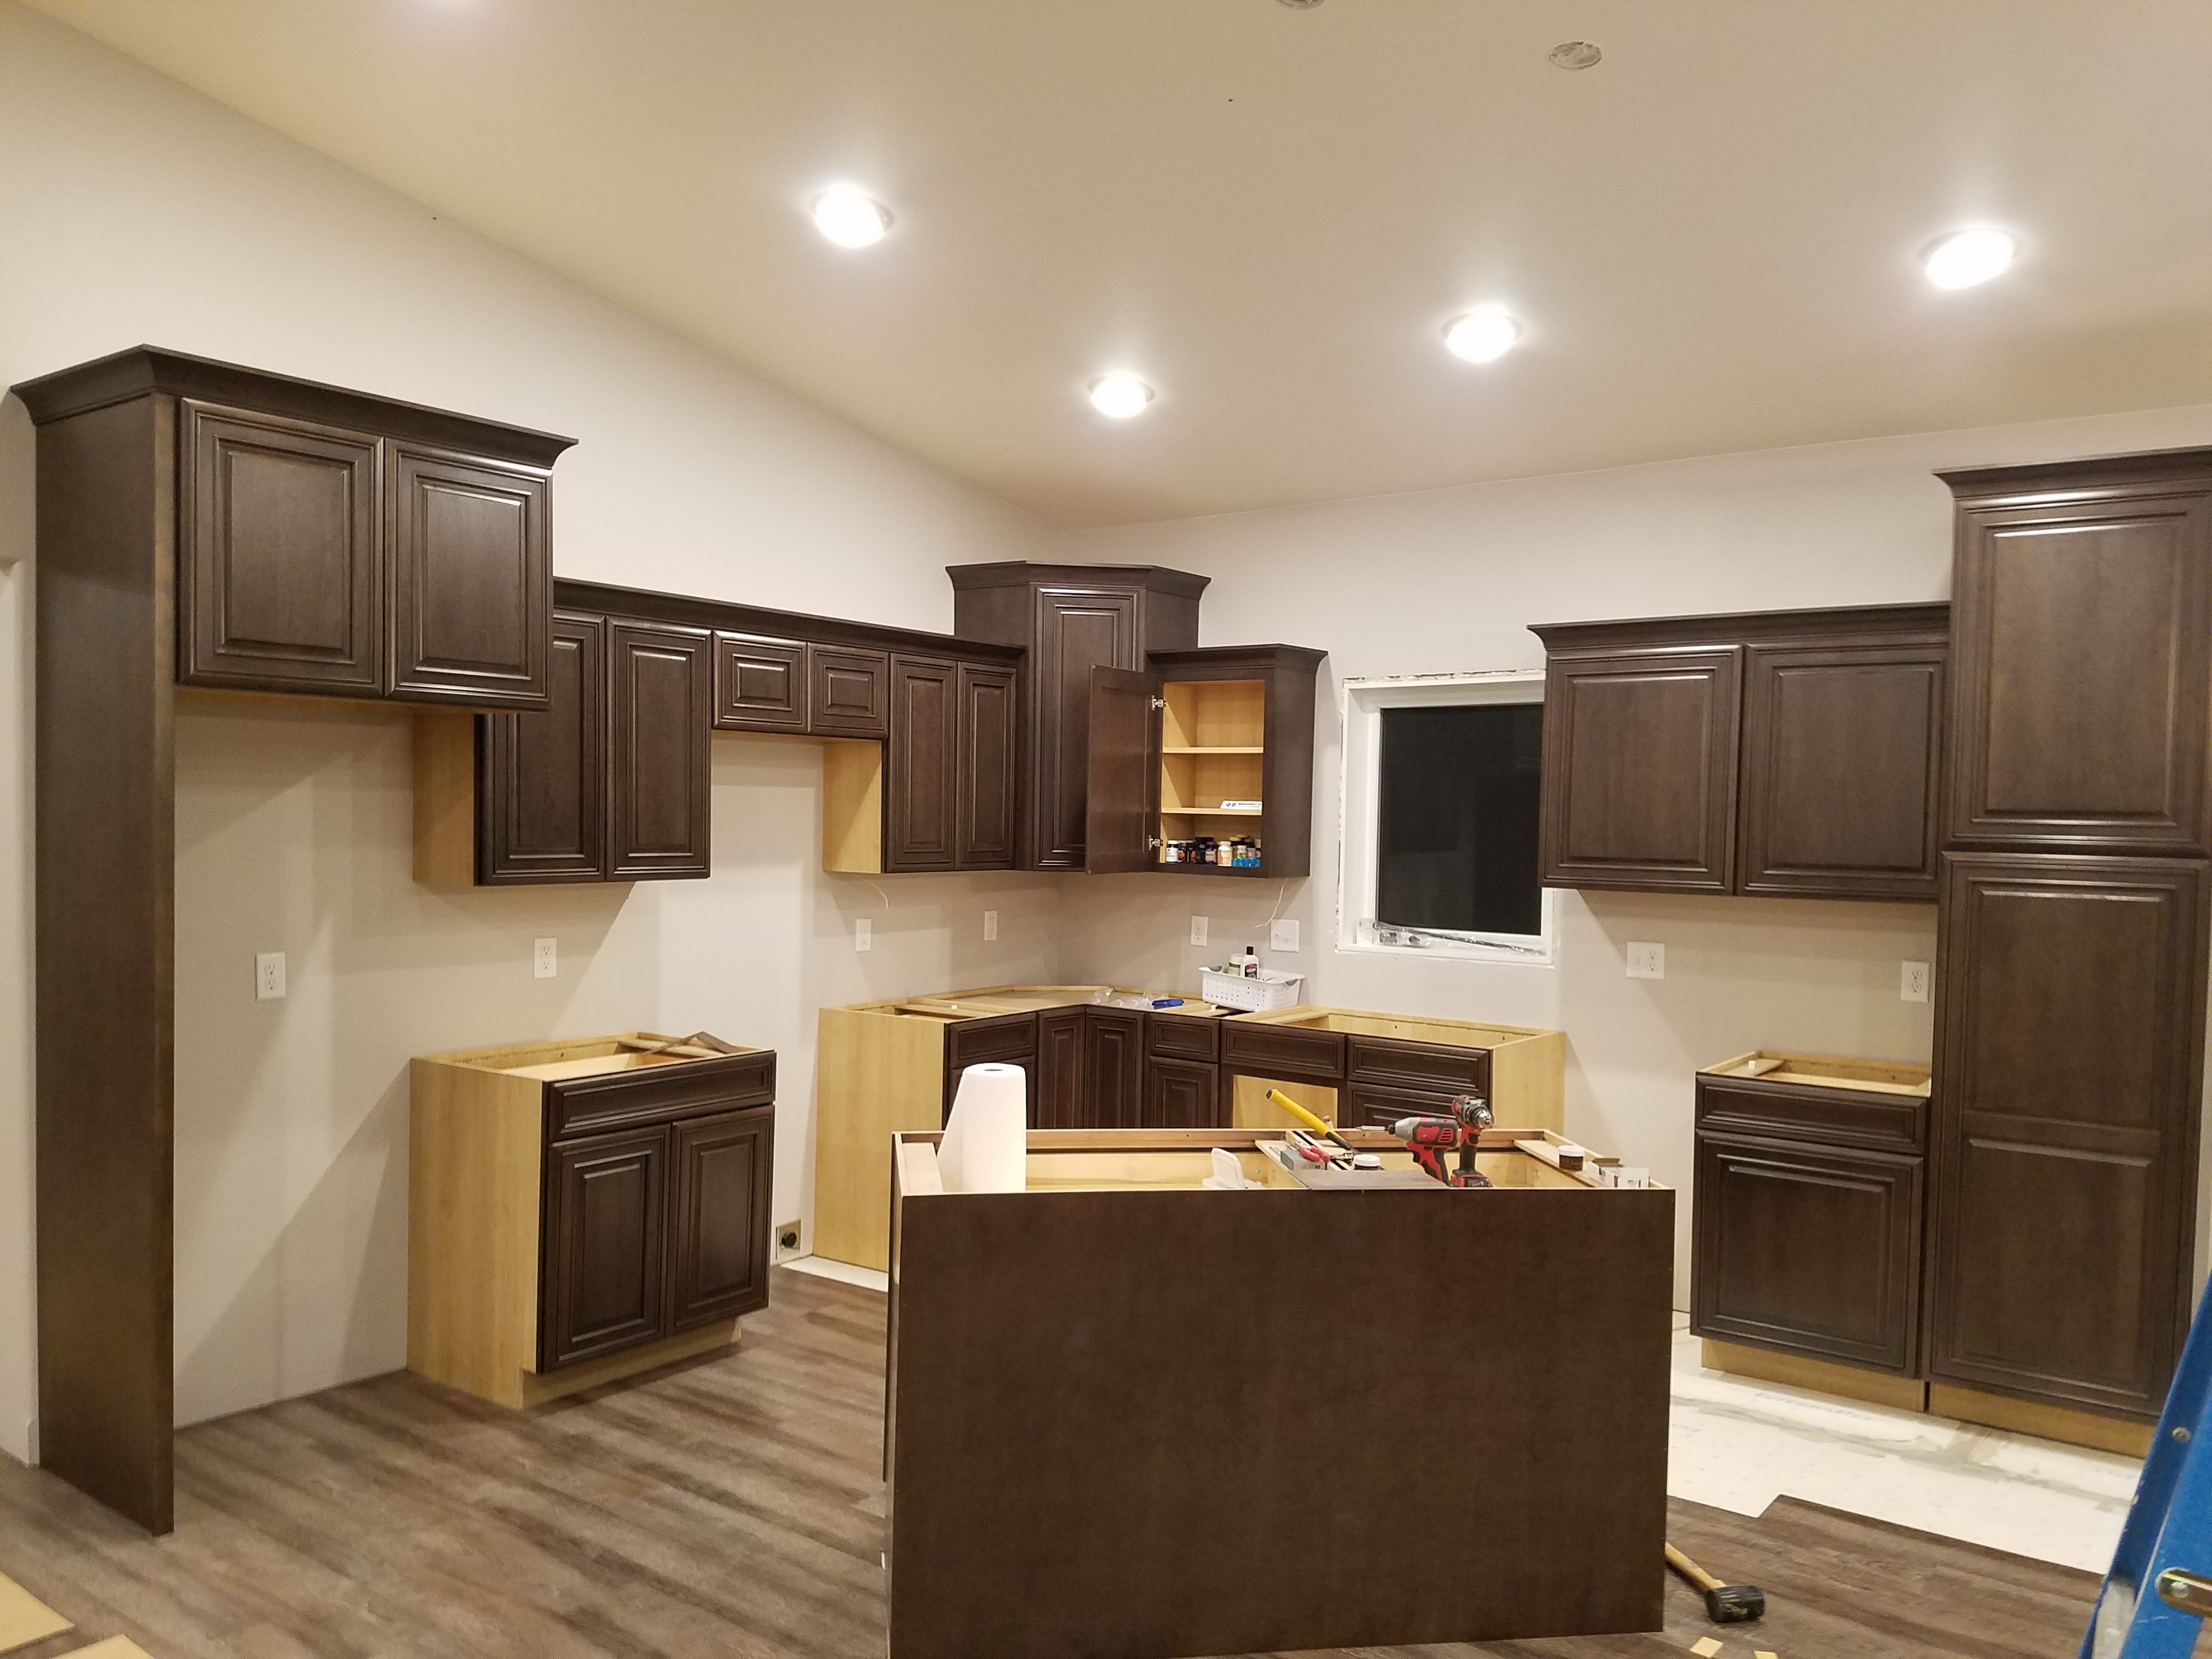 Tad Schmidt Builders' cabinet installation process is prompt, precise, and dependable.a prompt manner.